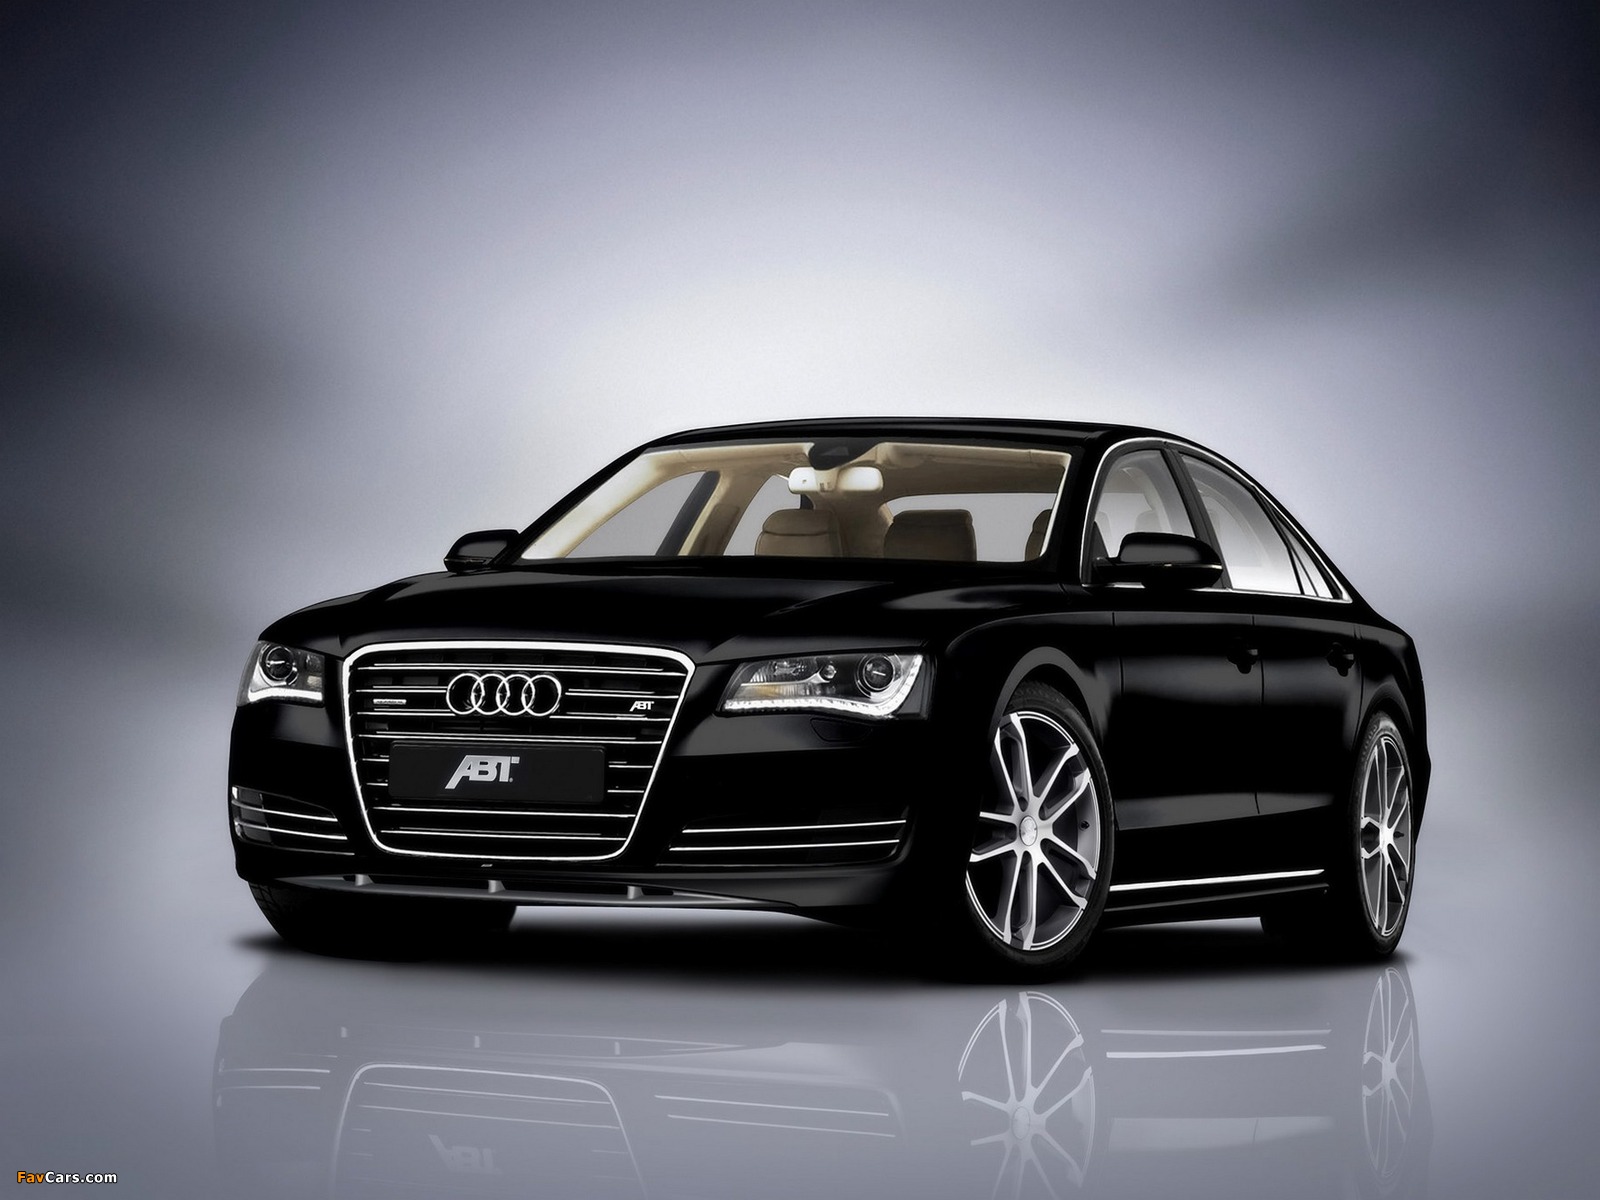 ABT AS8 4.2 TDI (D4) 2010 wallpapers (1600 x 1200)